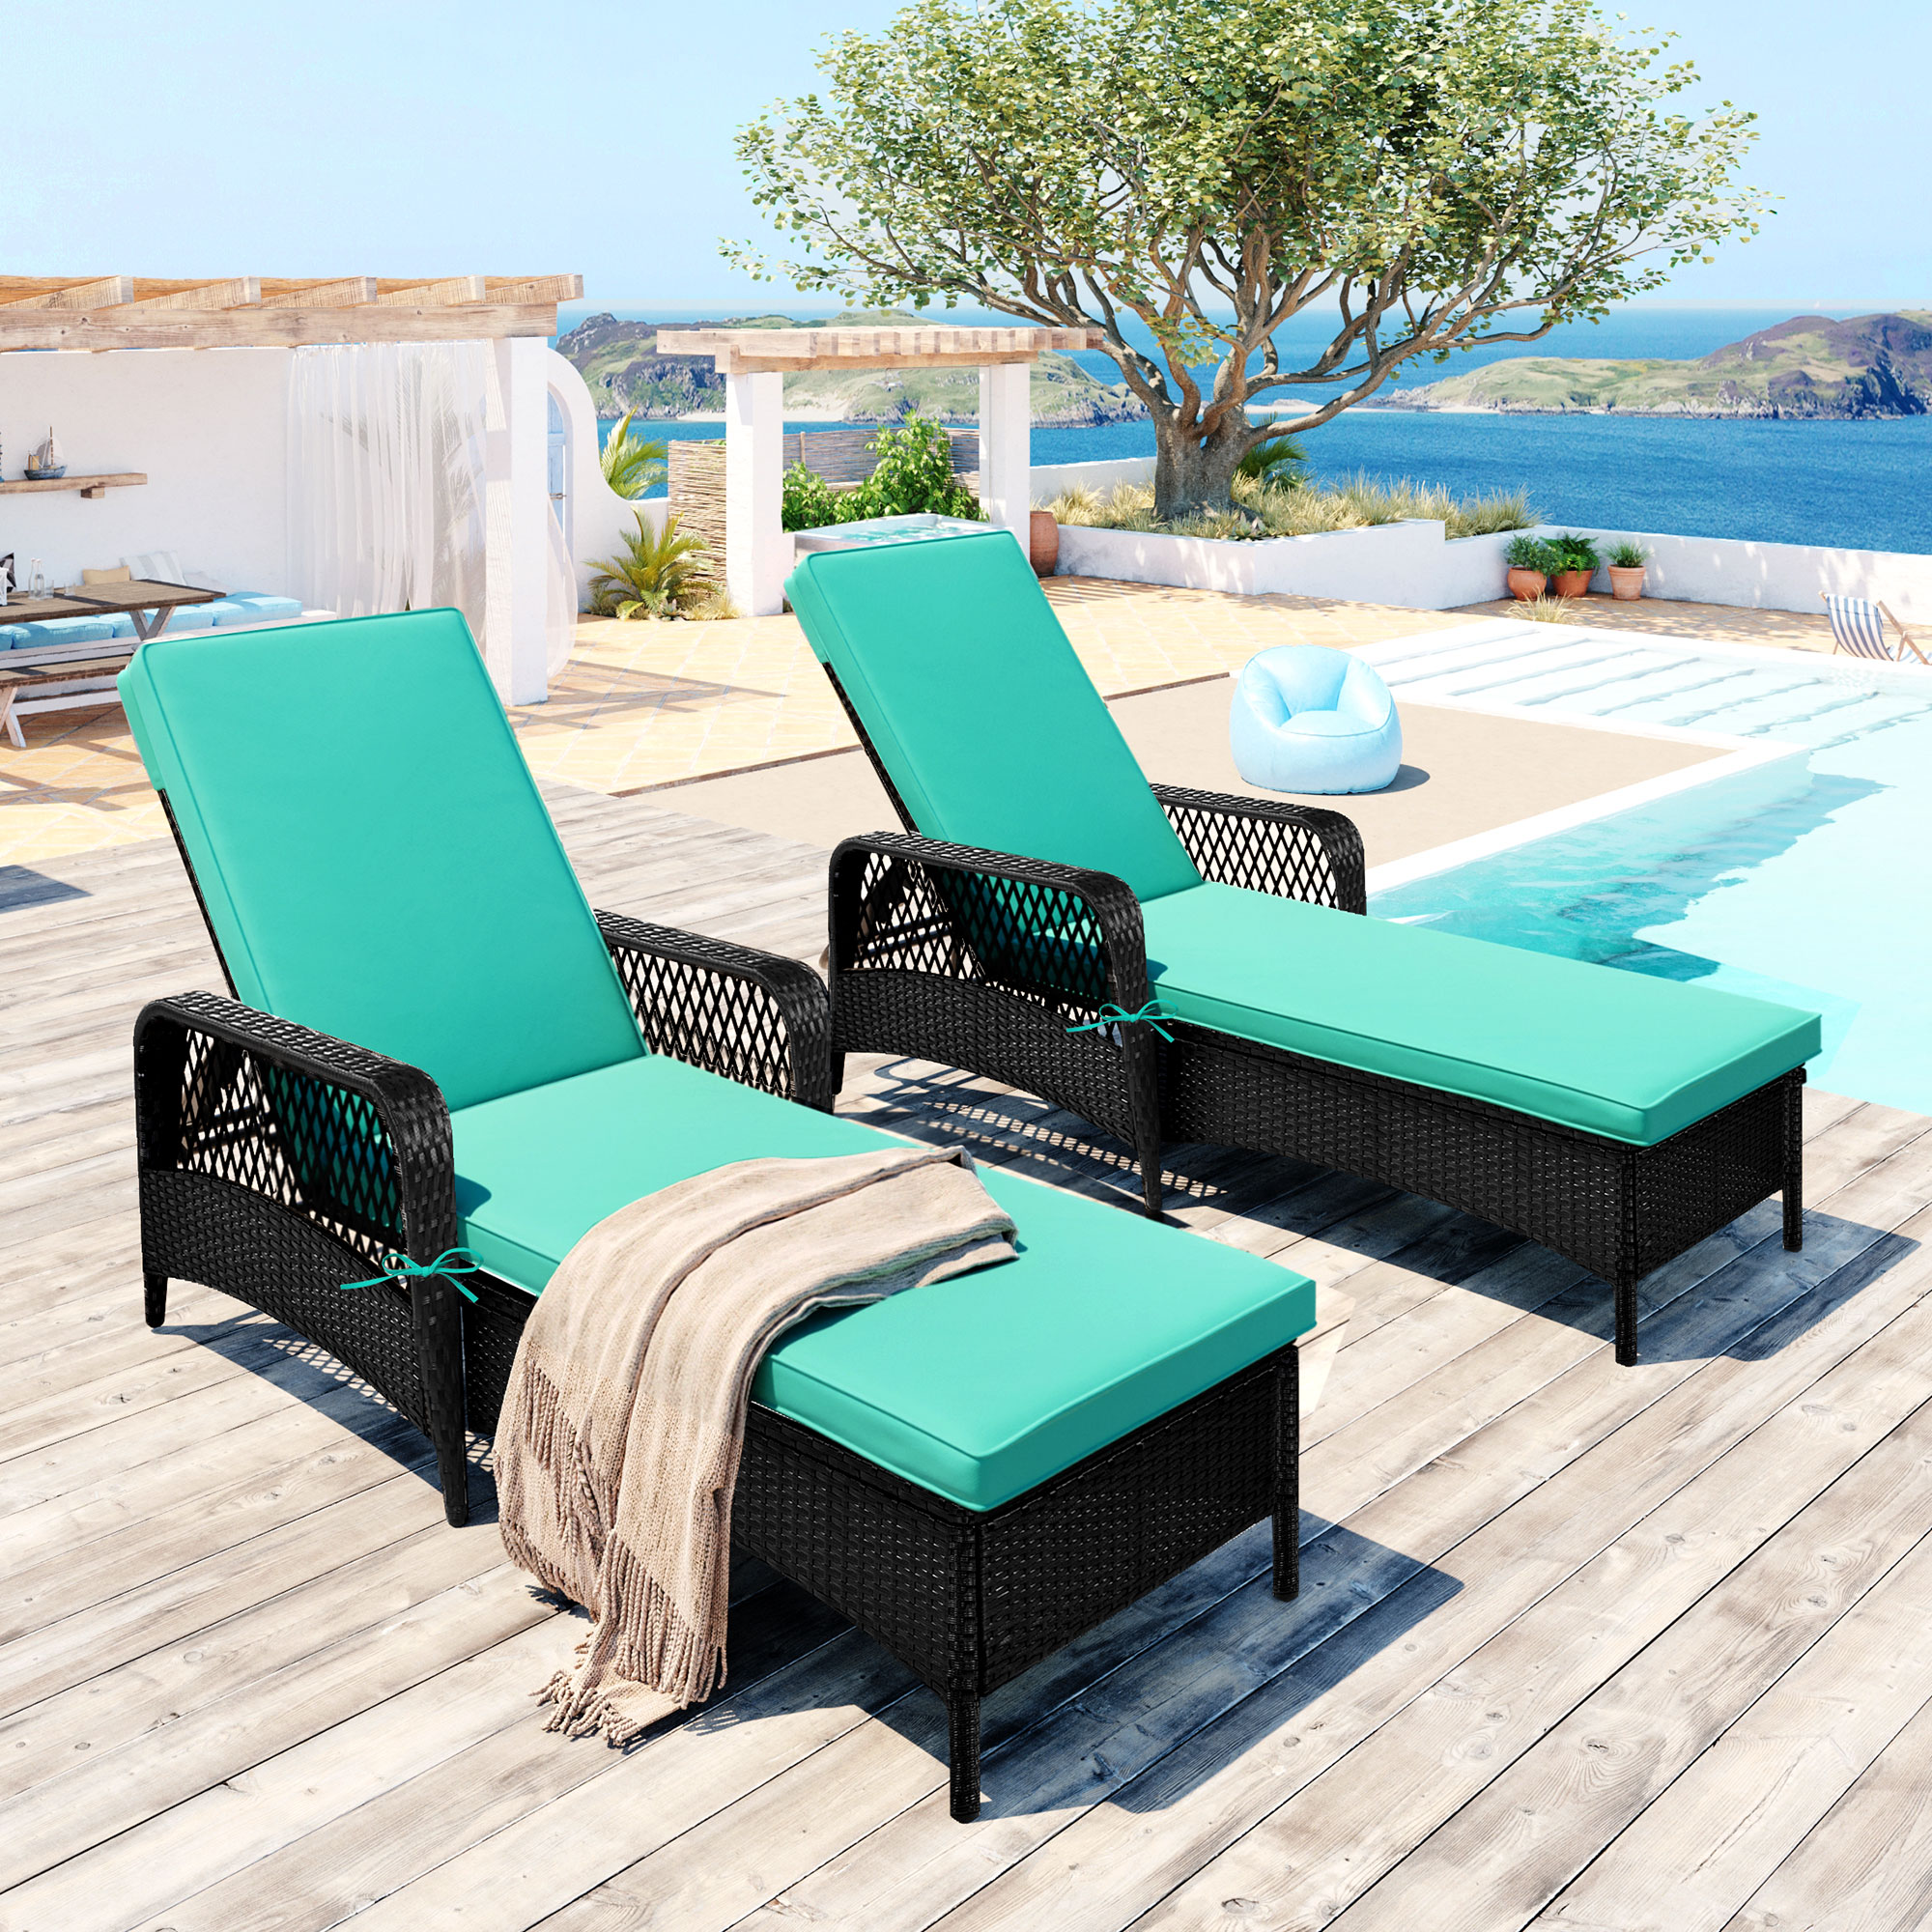 Patio Lounge Chairs Set of 2, Outdoor Chaise Lounges Chairs with 6 Backrest Angles, and Removable Cushions, PE Rattan Backrest Lounger Chairs Set for Pool Porch Backyard Patio, K2693 - image 1 of 10